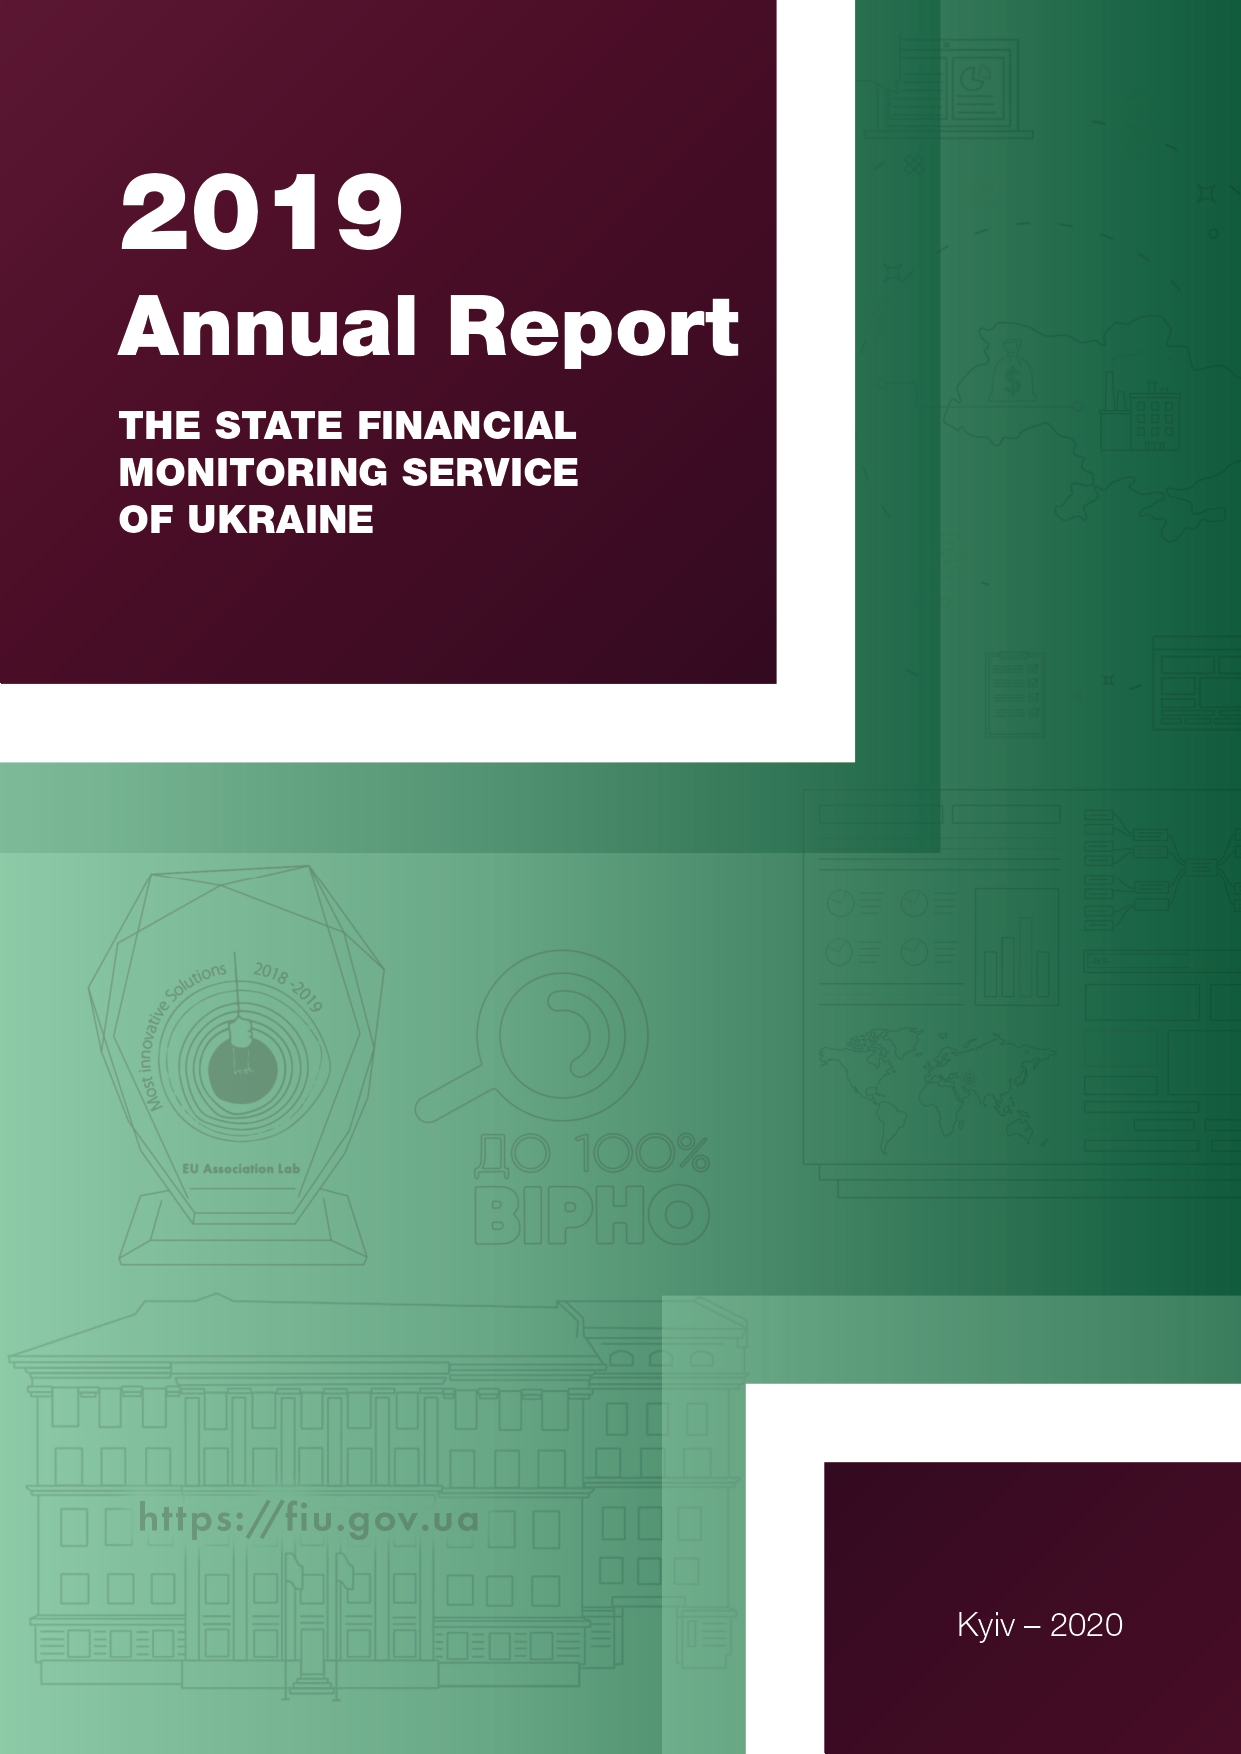 Report of the State Financial Monitoring Service of Ukraine 2019